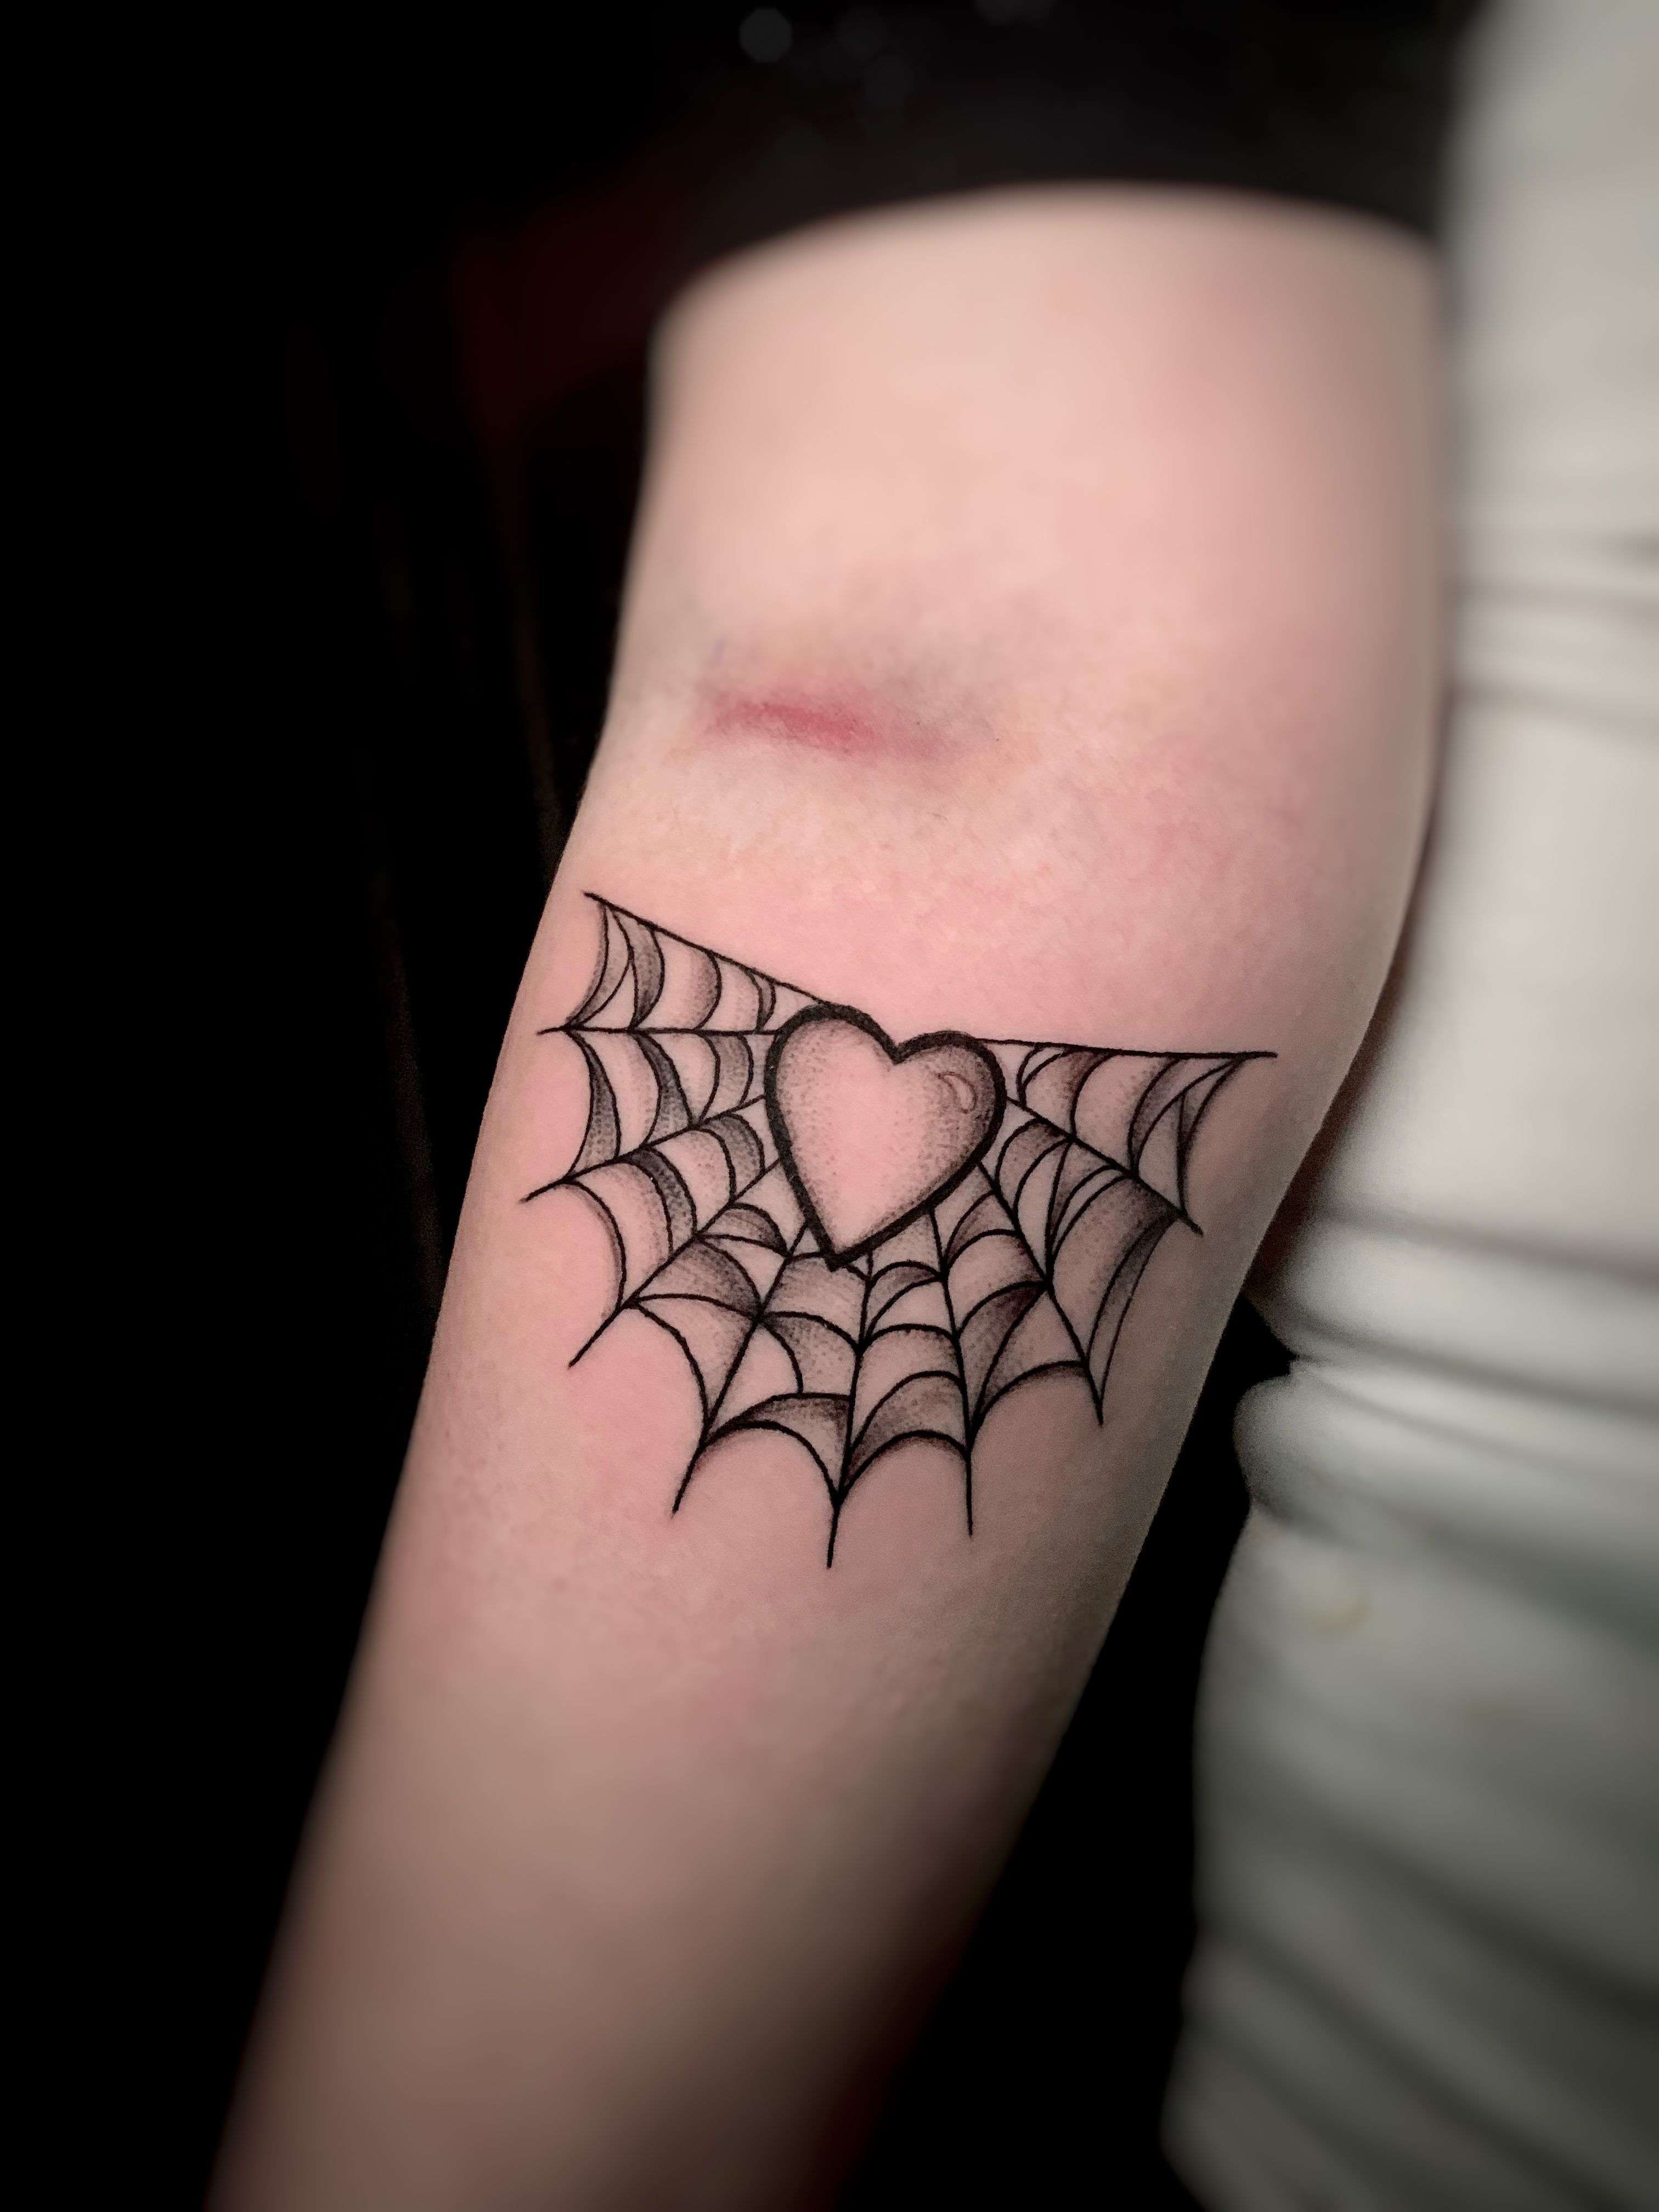 Spider Web Tattoos: Find Your Perfect Design (86 Ideas) | Inkbox™